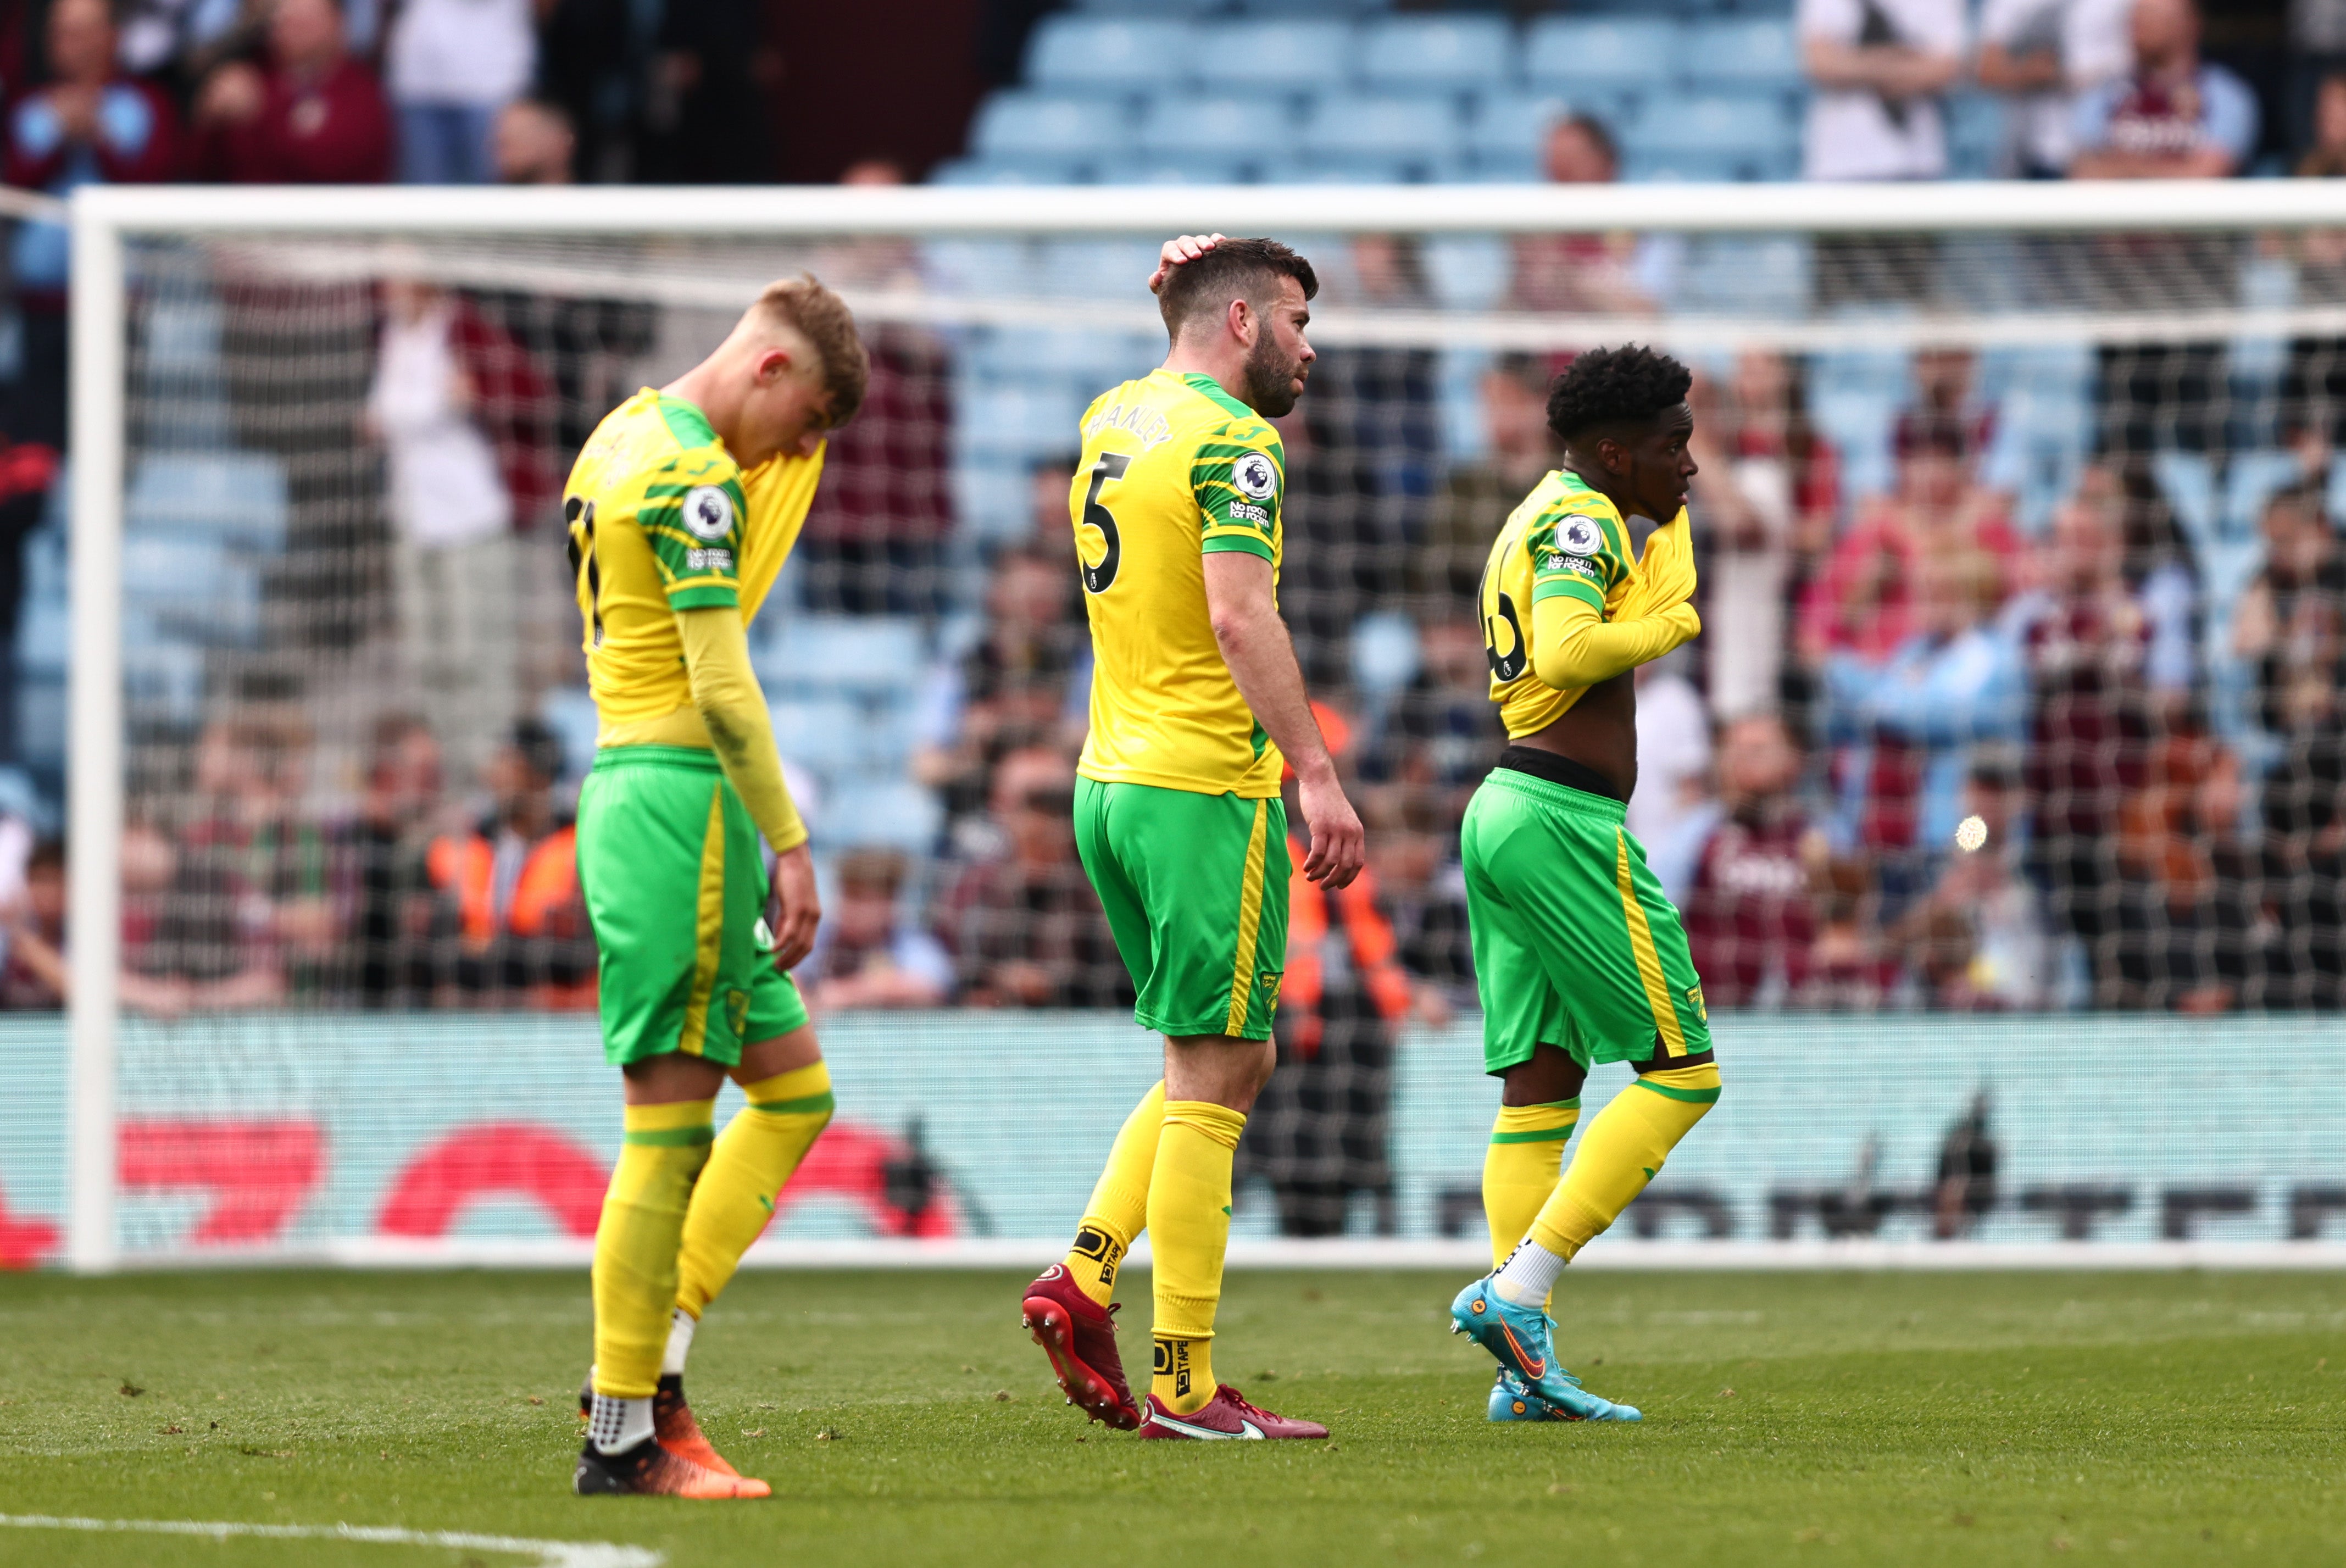 Norwich City have once again been relegated to the Championship